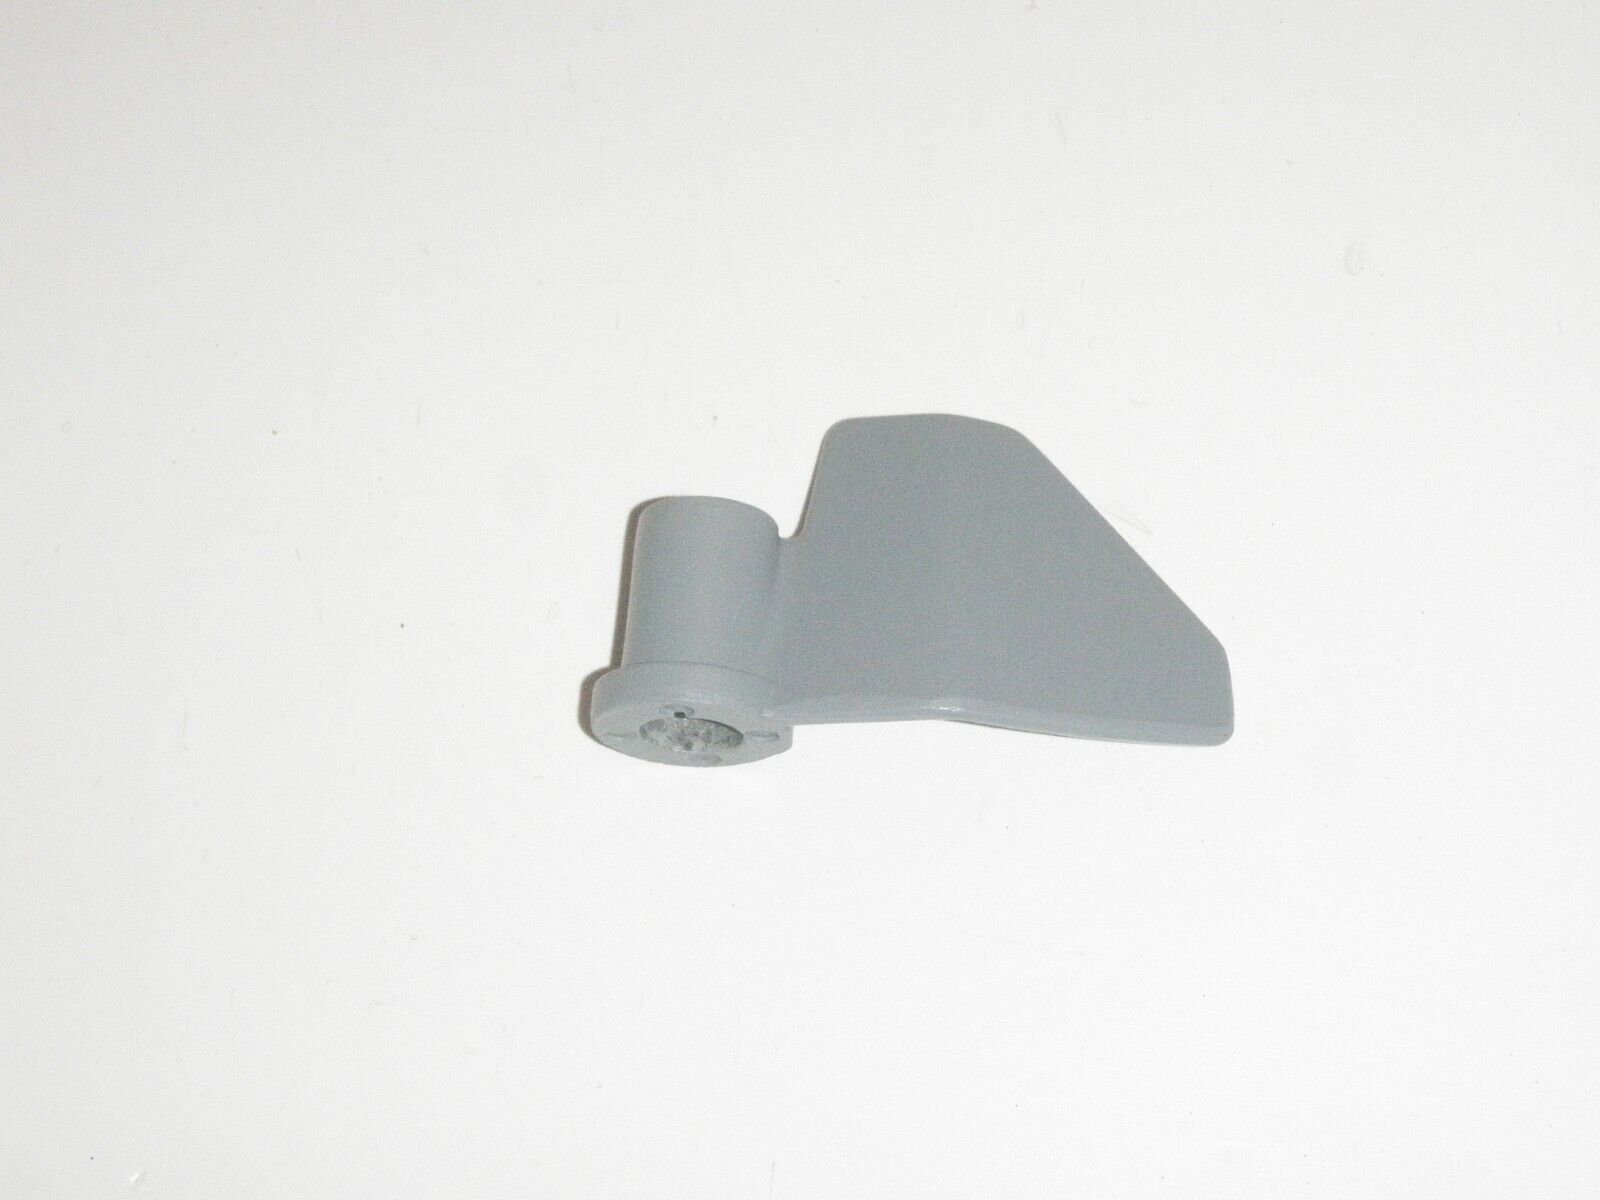 OEM Paddle for Toastmaster Bread Maker Machine Model TBR2 only - $28.42